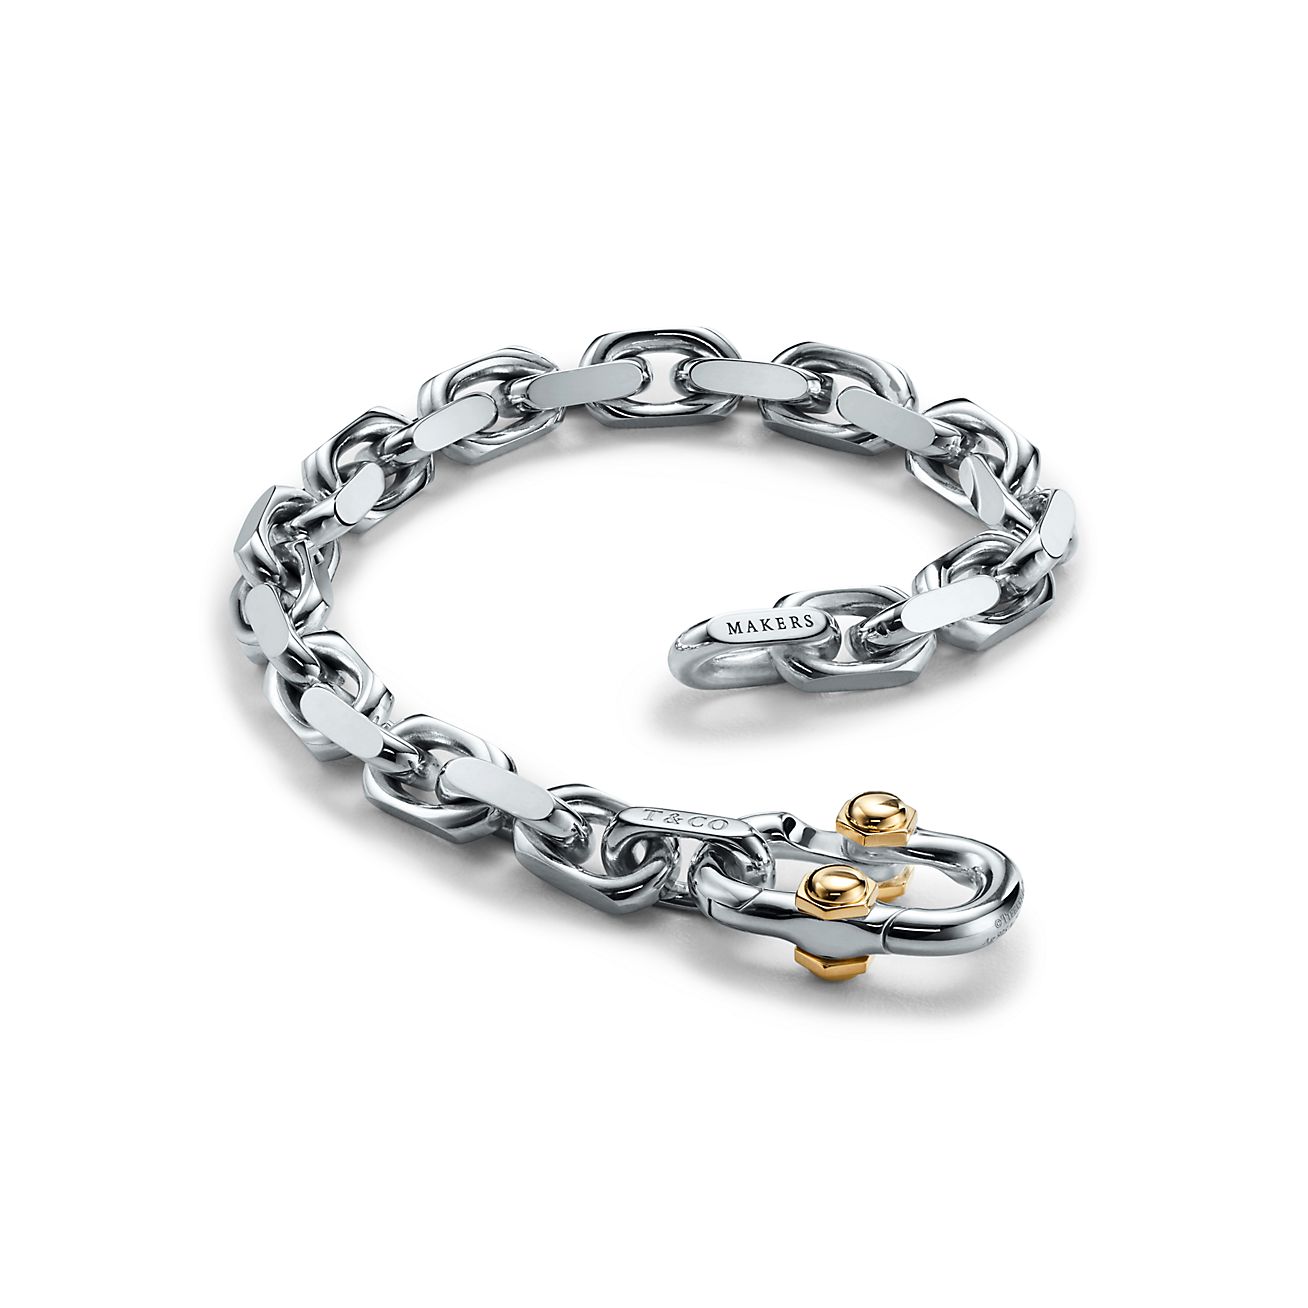 Tiffany 1837™ Makers Wide Chain Bracelet in Sterling Silver and 18k Gold